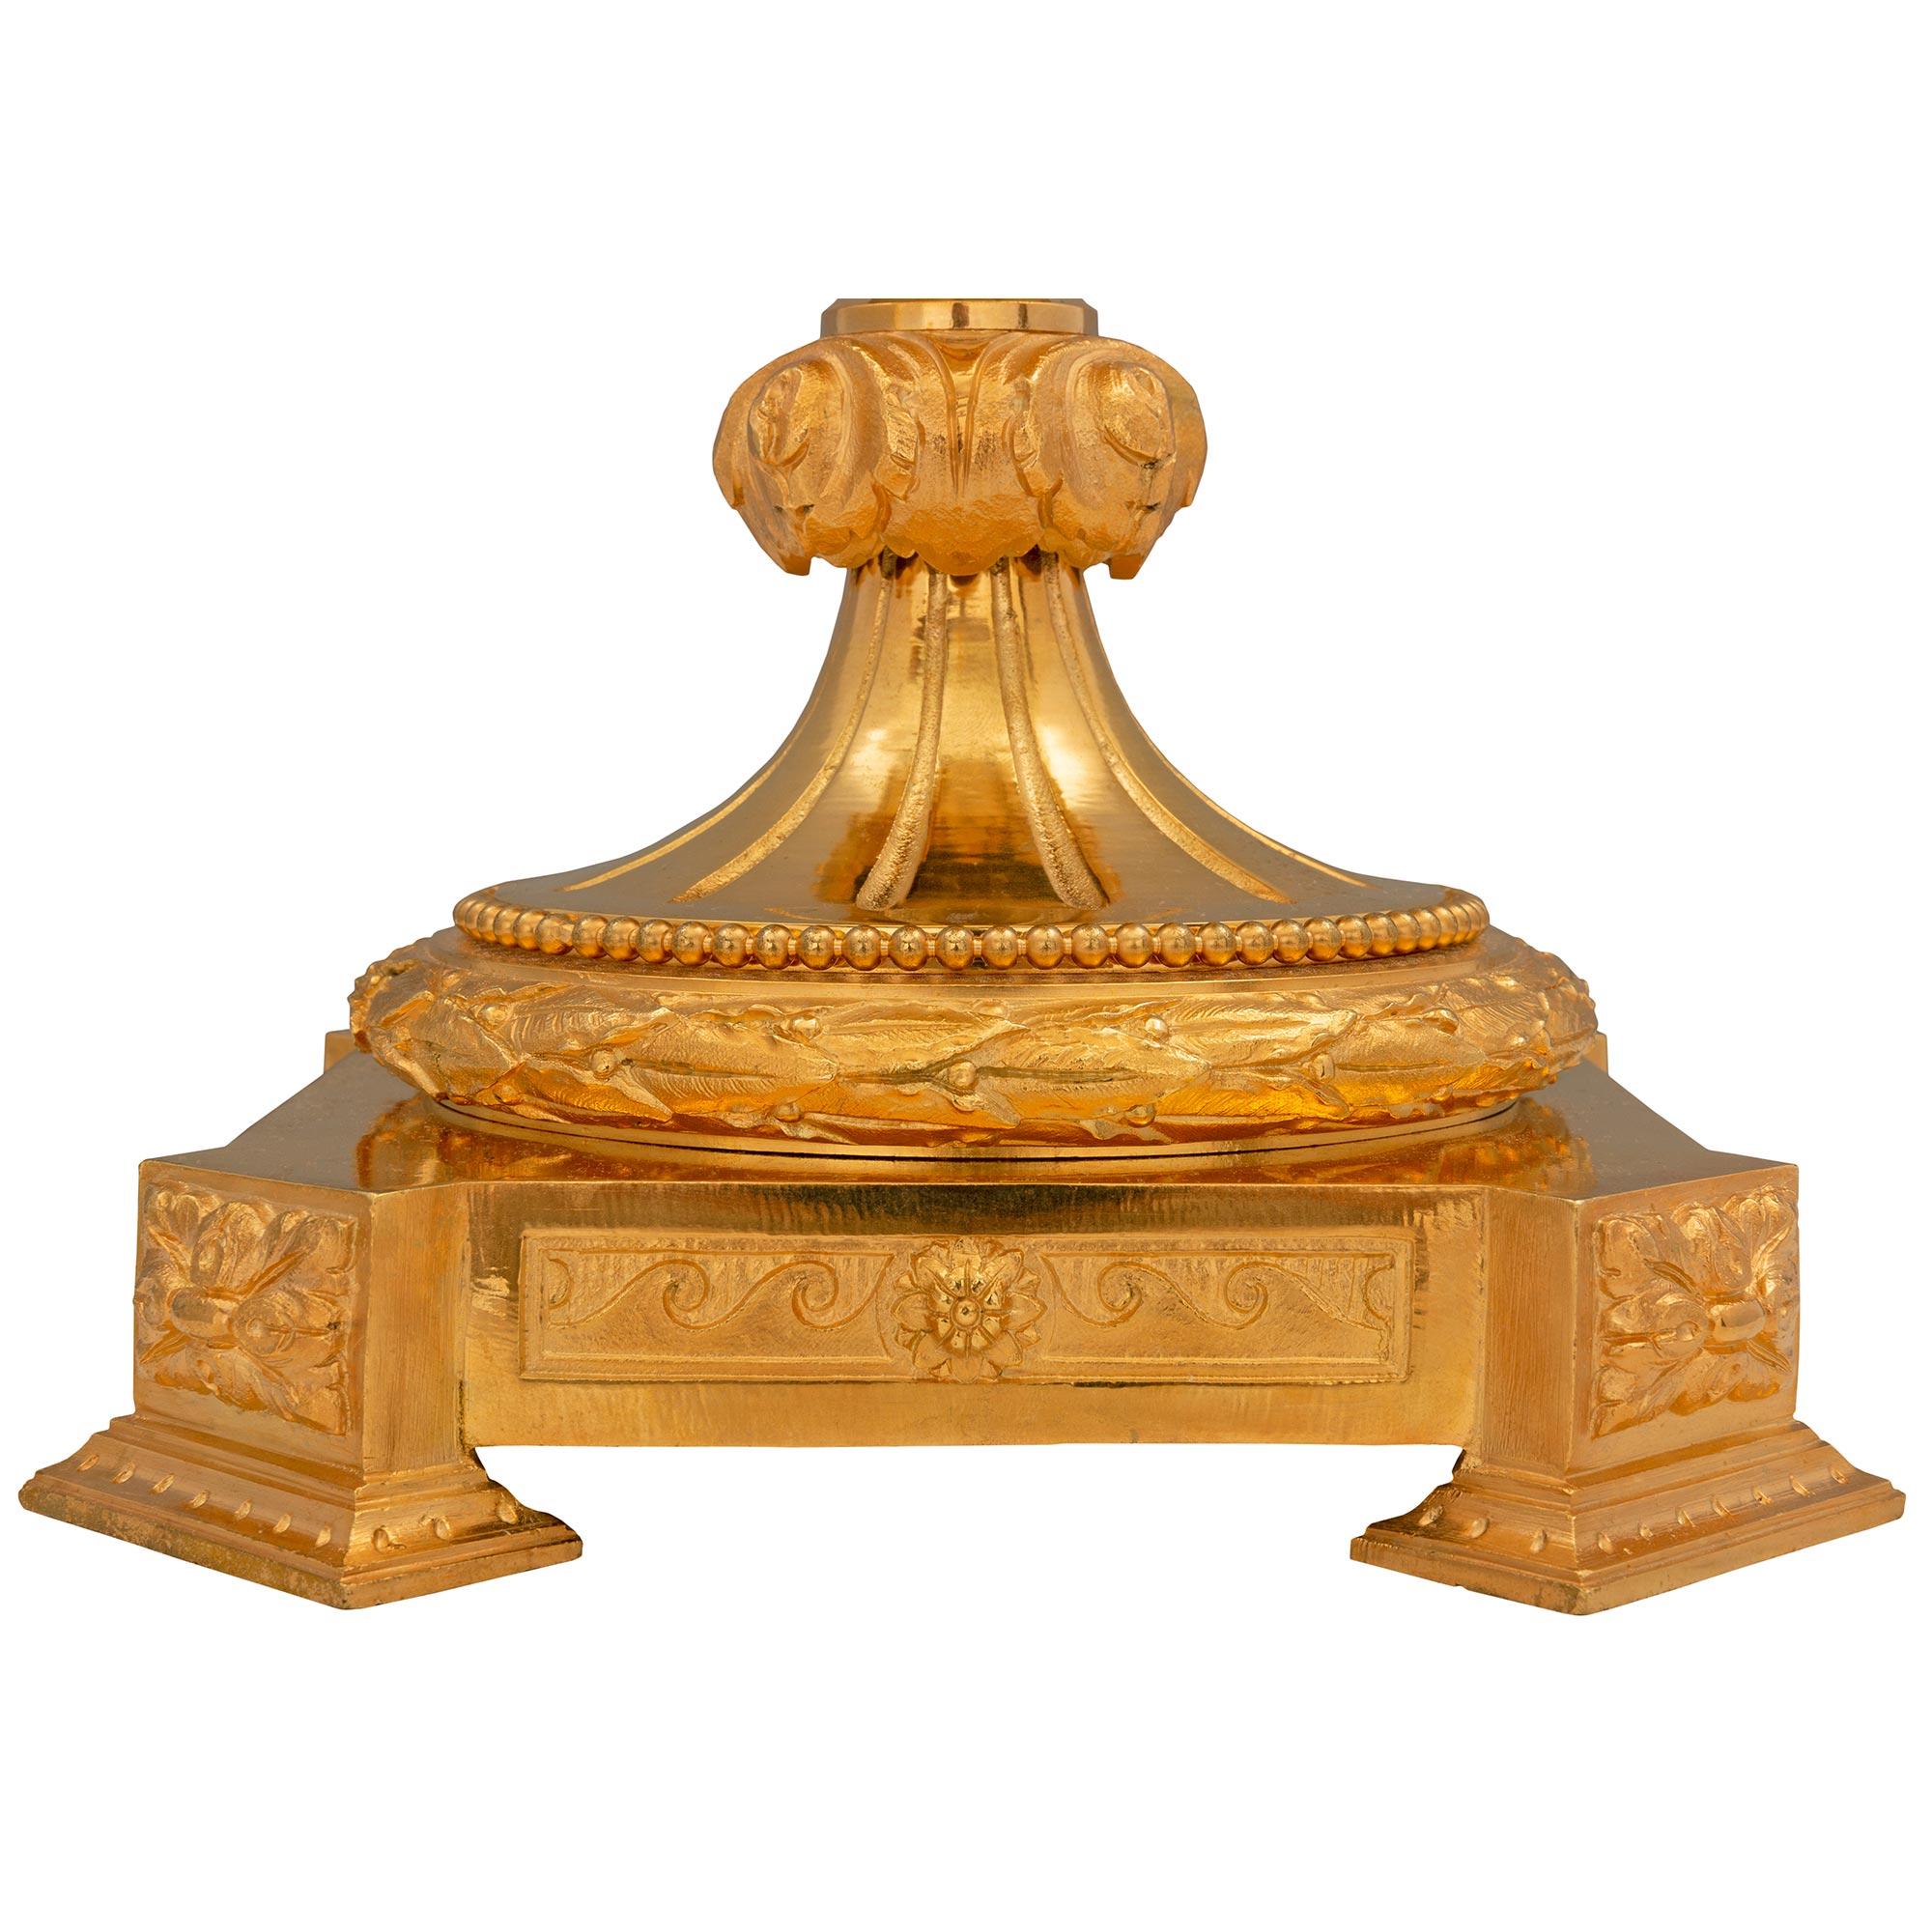 French 19th Century Louis XVI Style Vert Campan Marble and Ormolu Lamp For Sale 5